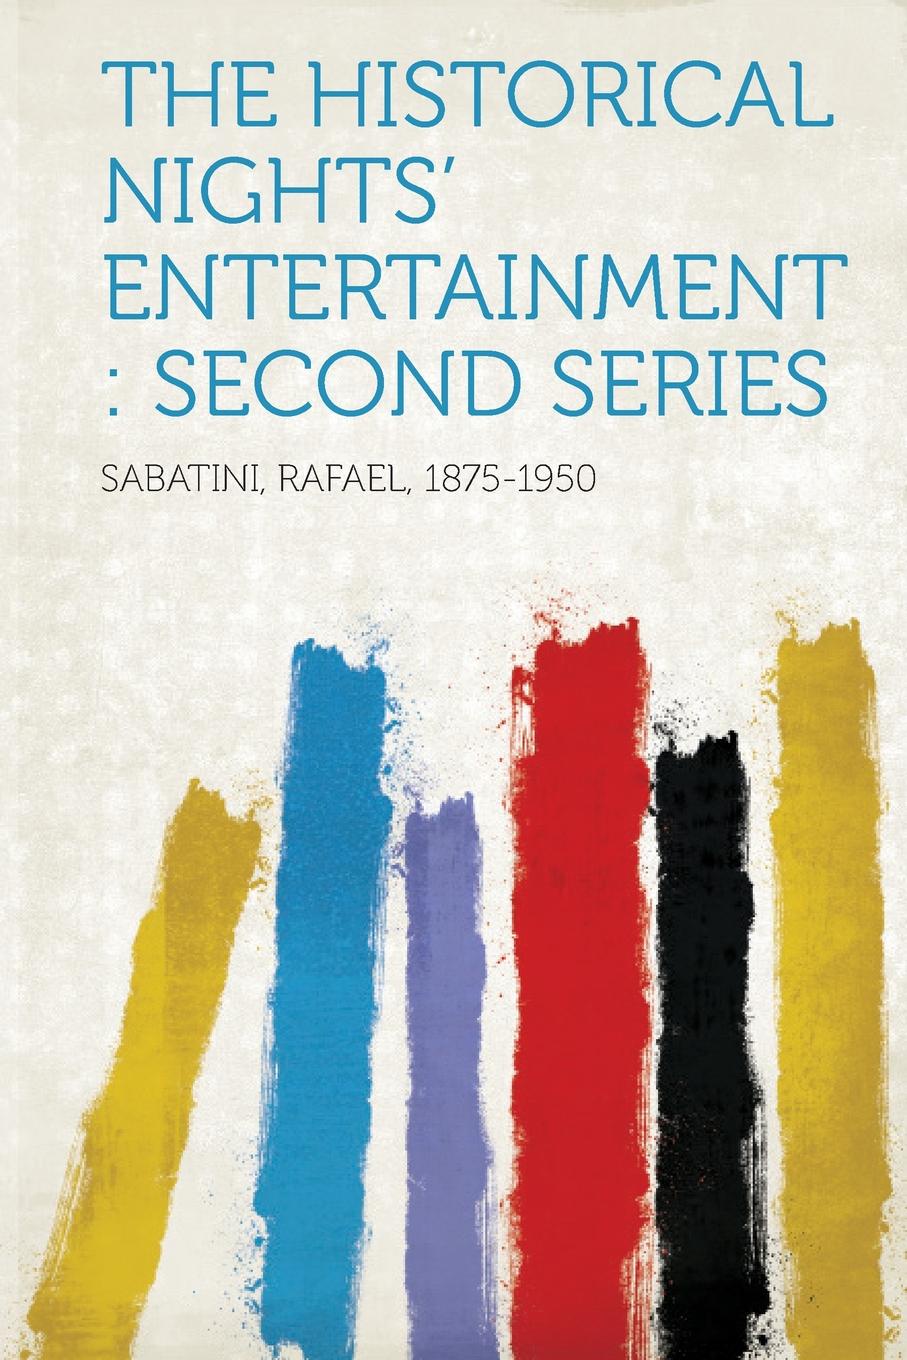 The Historical Nights. Entertainment. Second Series